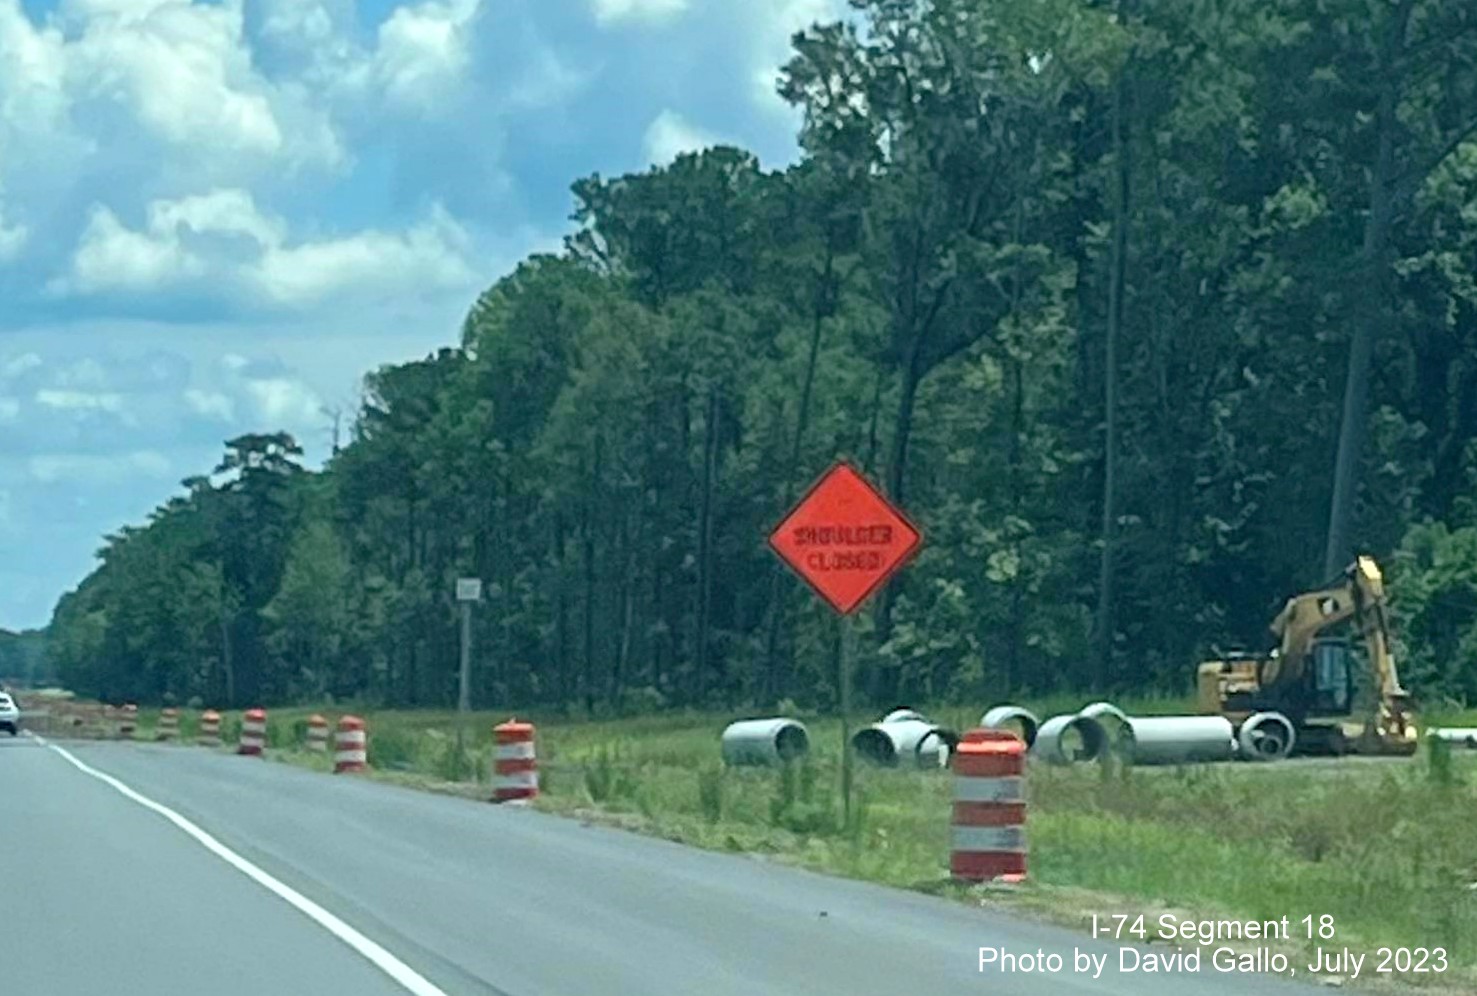 Image of construction equipment being stored prior to Old Lake Road in Lake Waccamaw on US 74/76 (Future I-74) East, David Gallo, July 2023